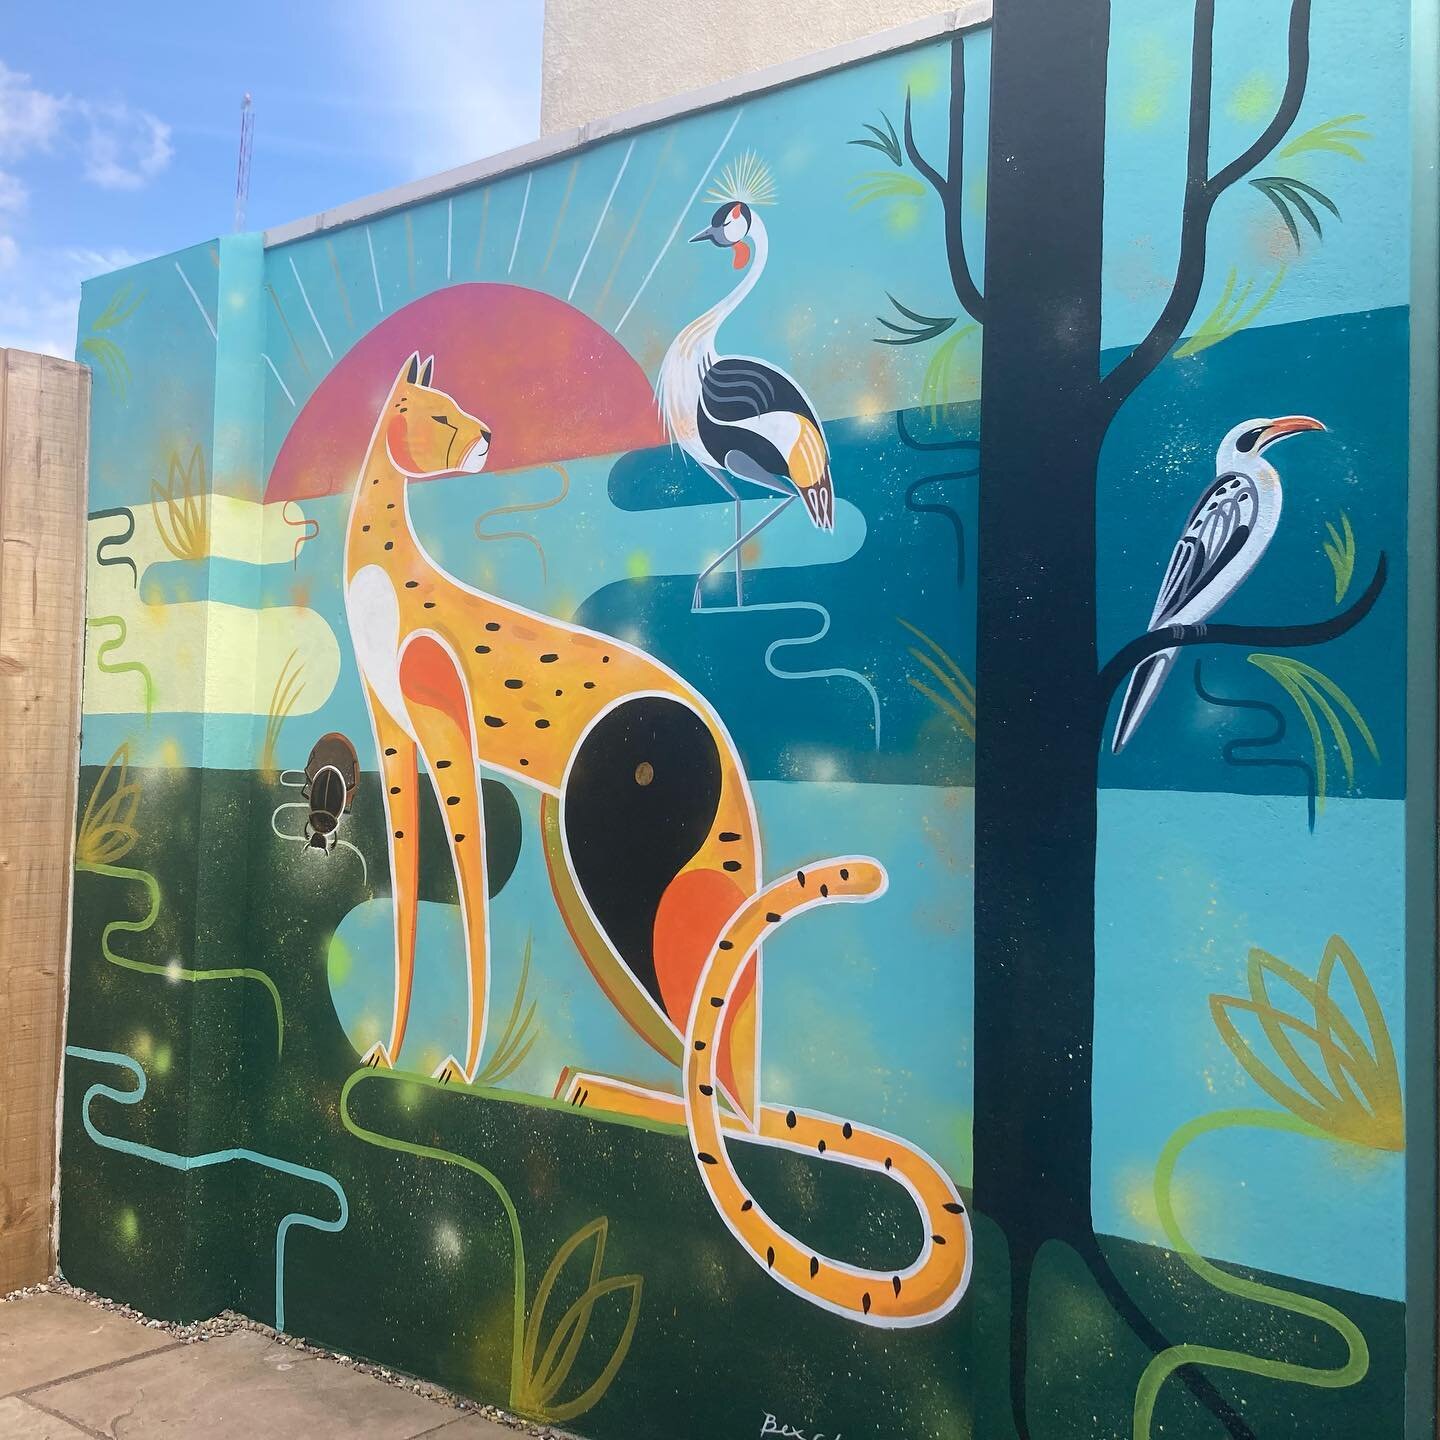 It&rsquo;s finished! Such a pleasure to paint this wall for some really lovely folks this last week. 

The brief was to capture some of their favourite animals from a trip to Tanzania, including a cheetah, hornbill, gray crowned crane and a dung beet